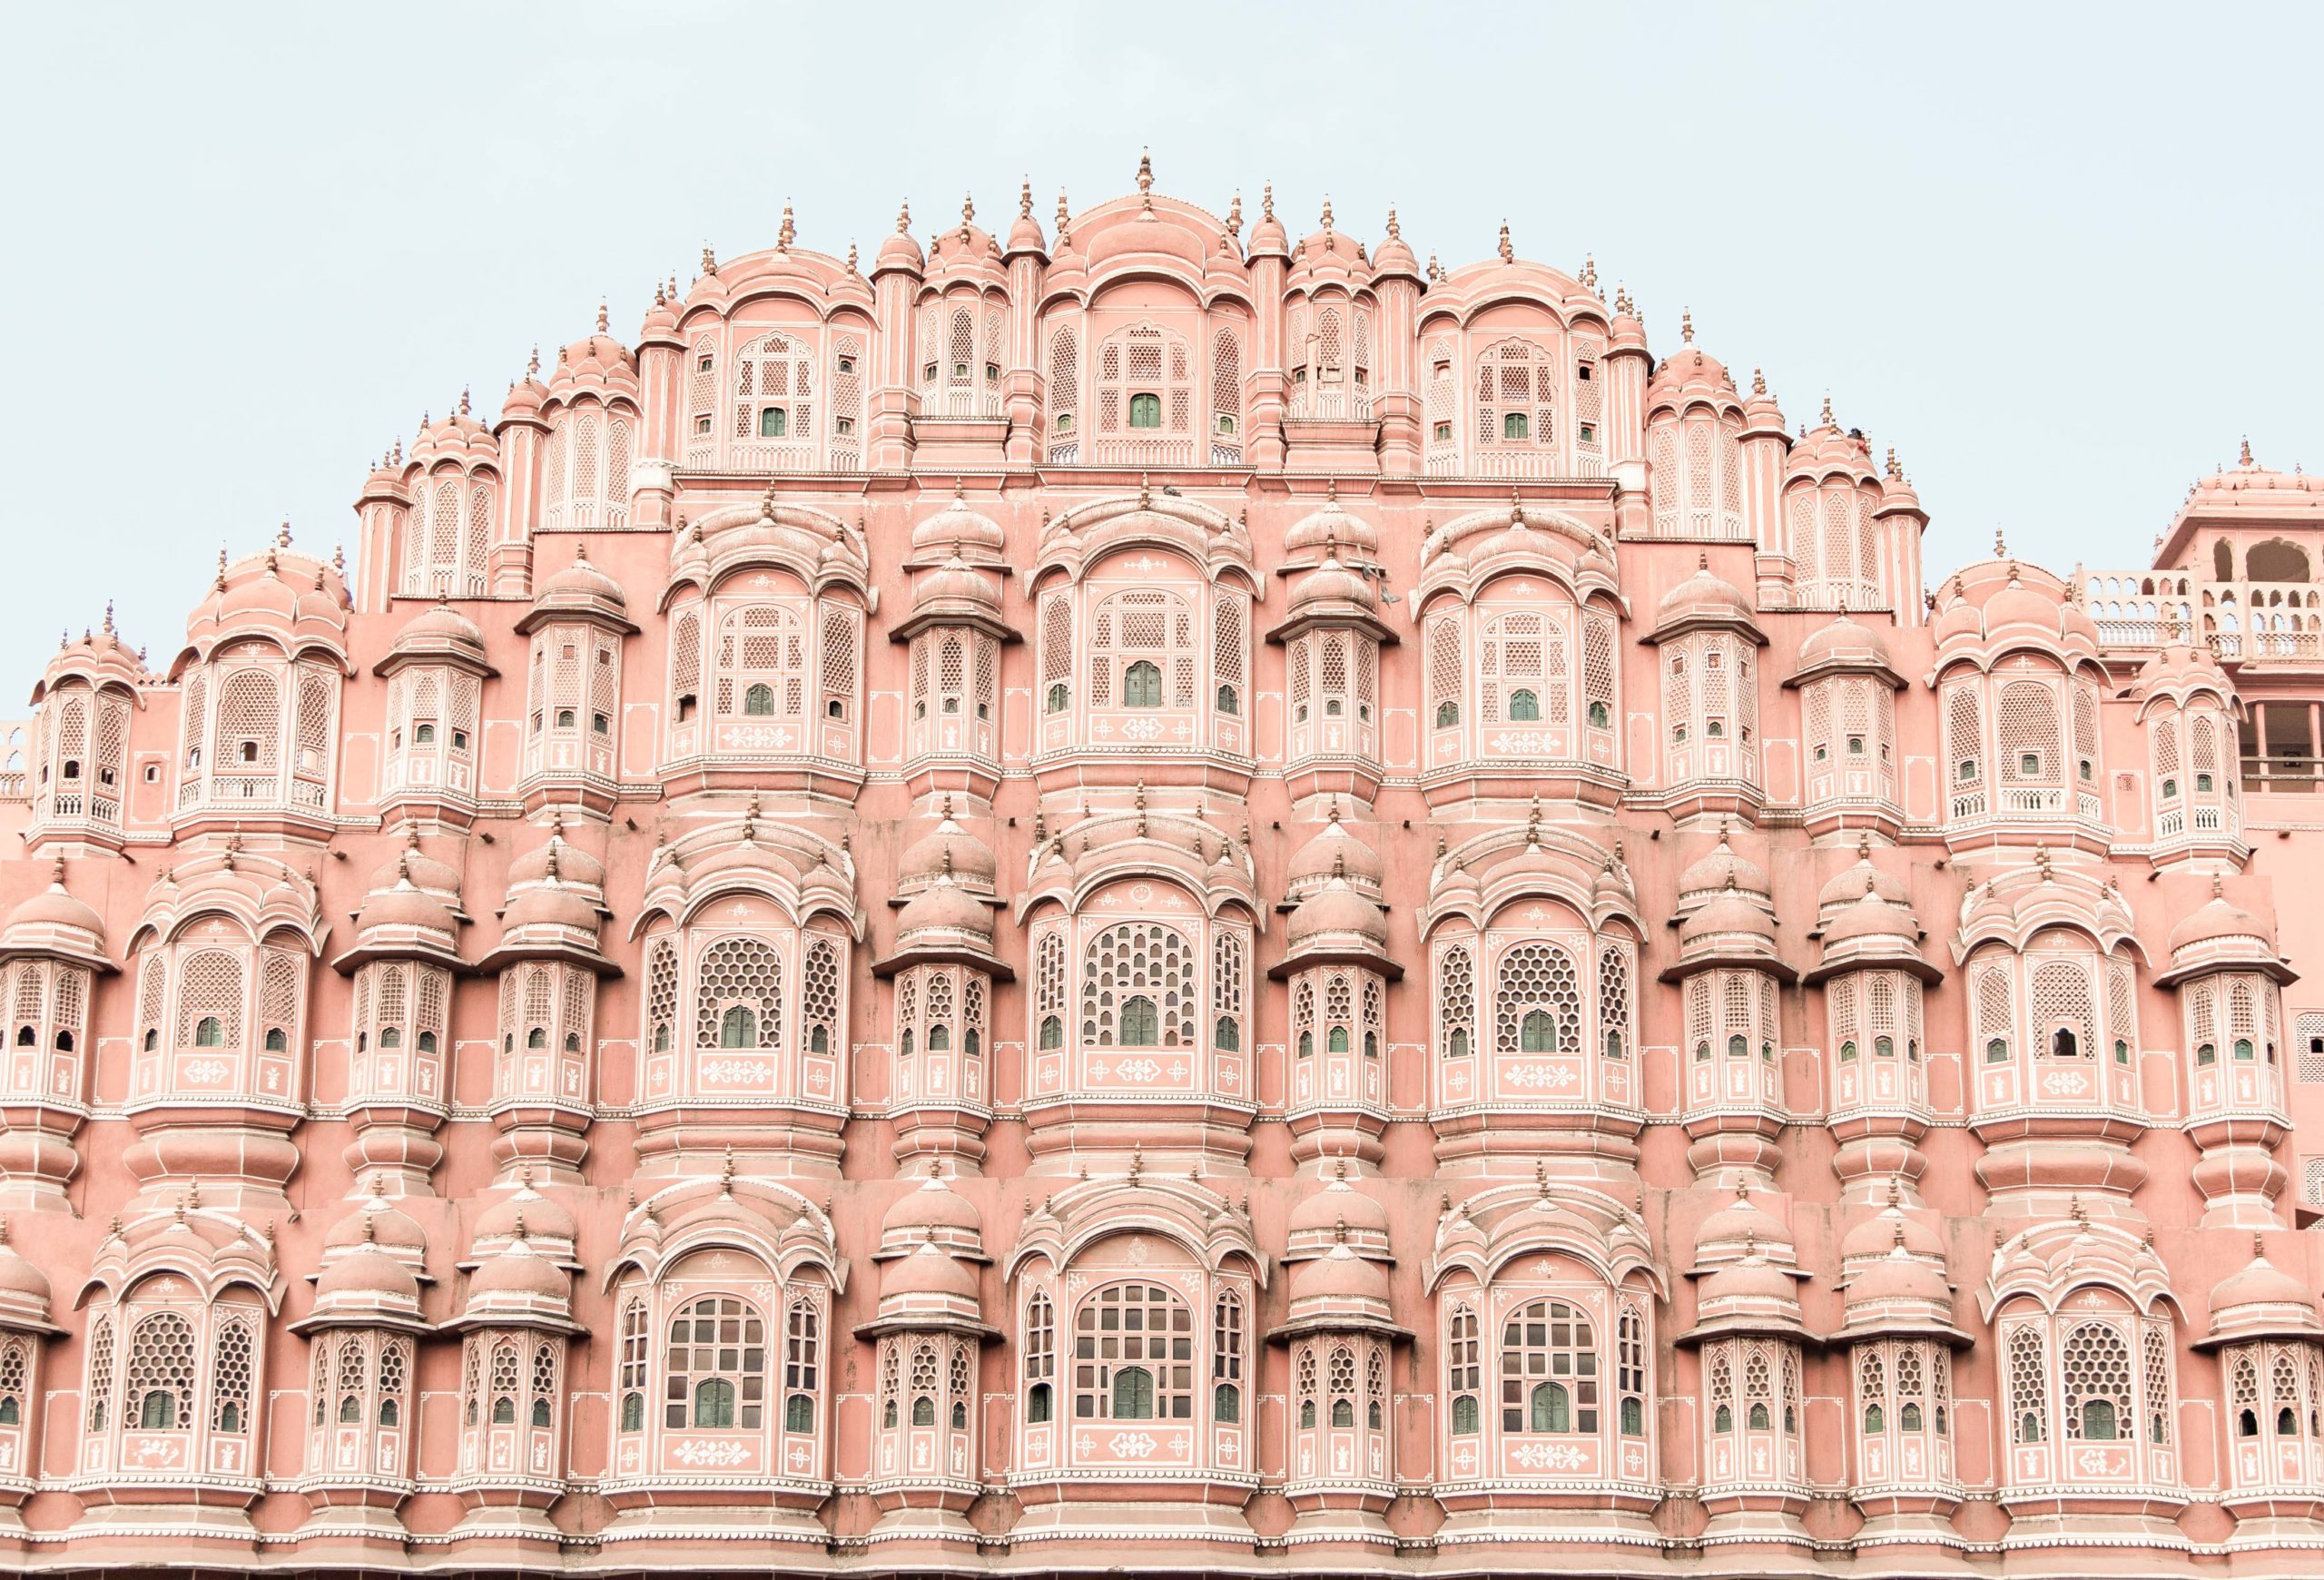 Guide to photograph Jaipur